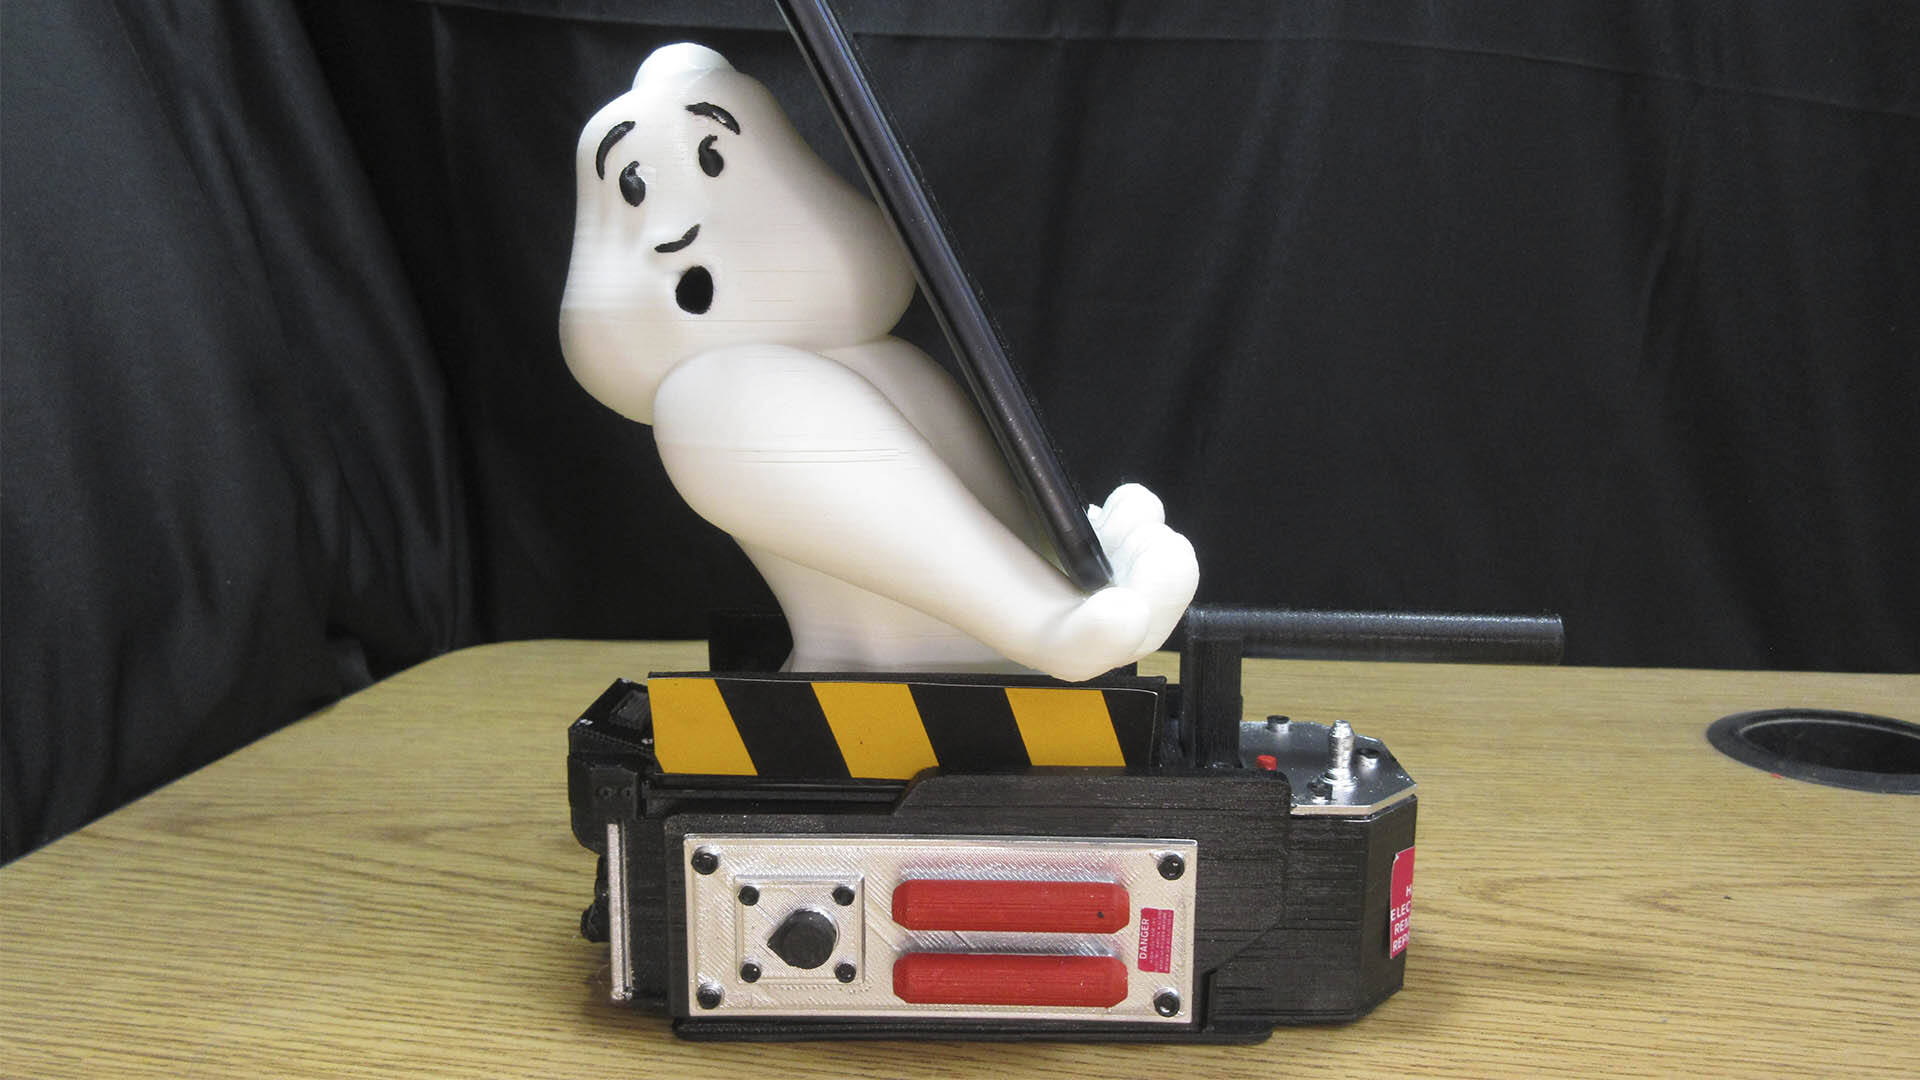 GHOSTBUSTERS FANART CELL PHONE TRAP